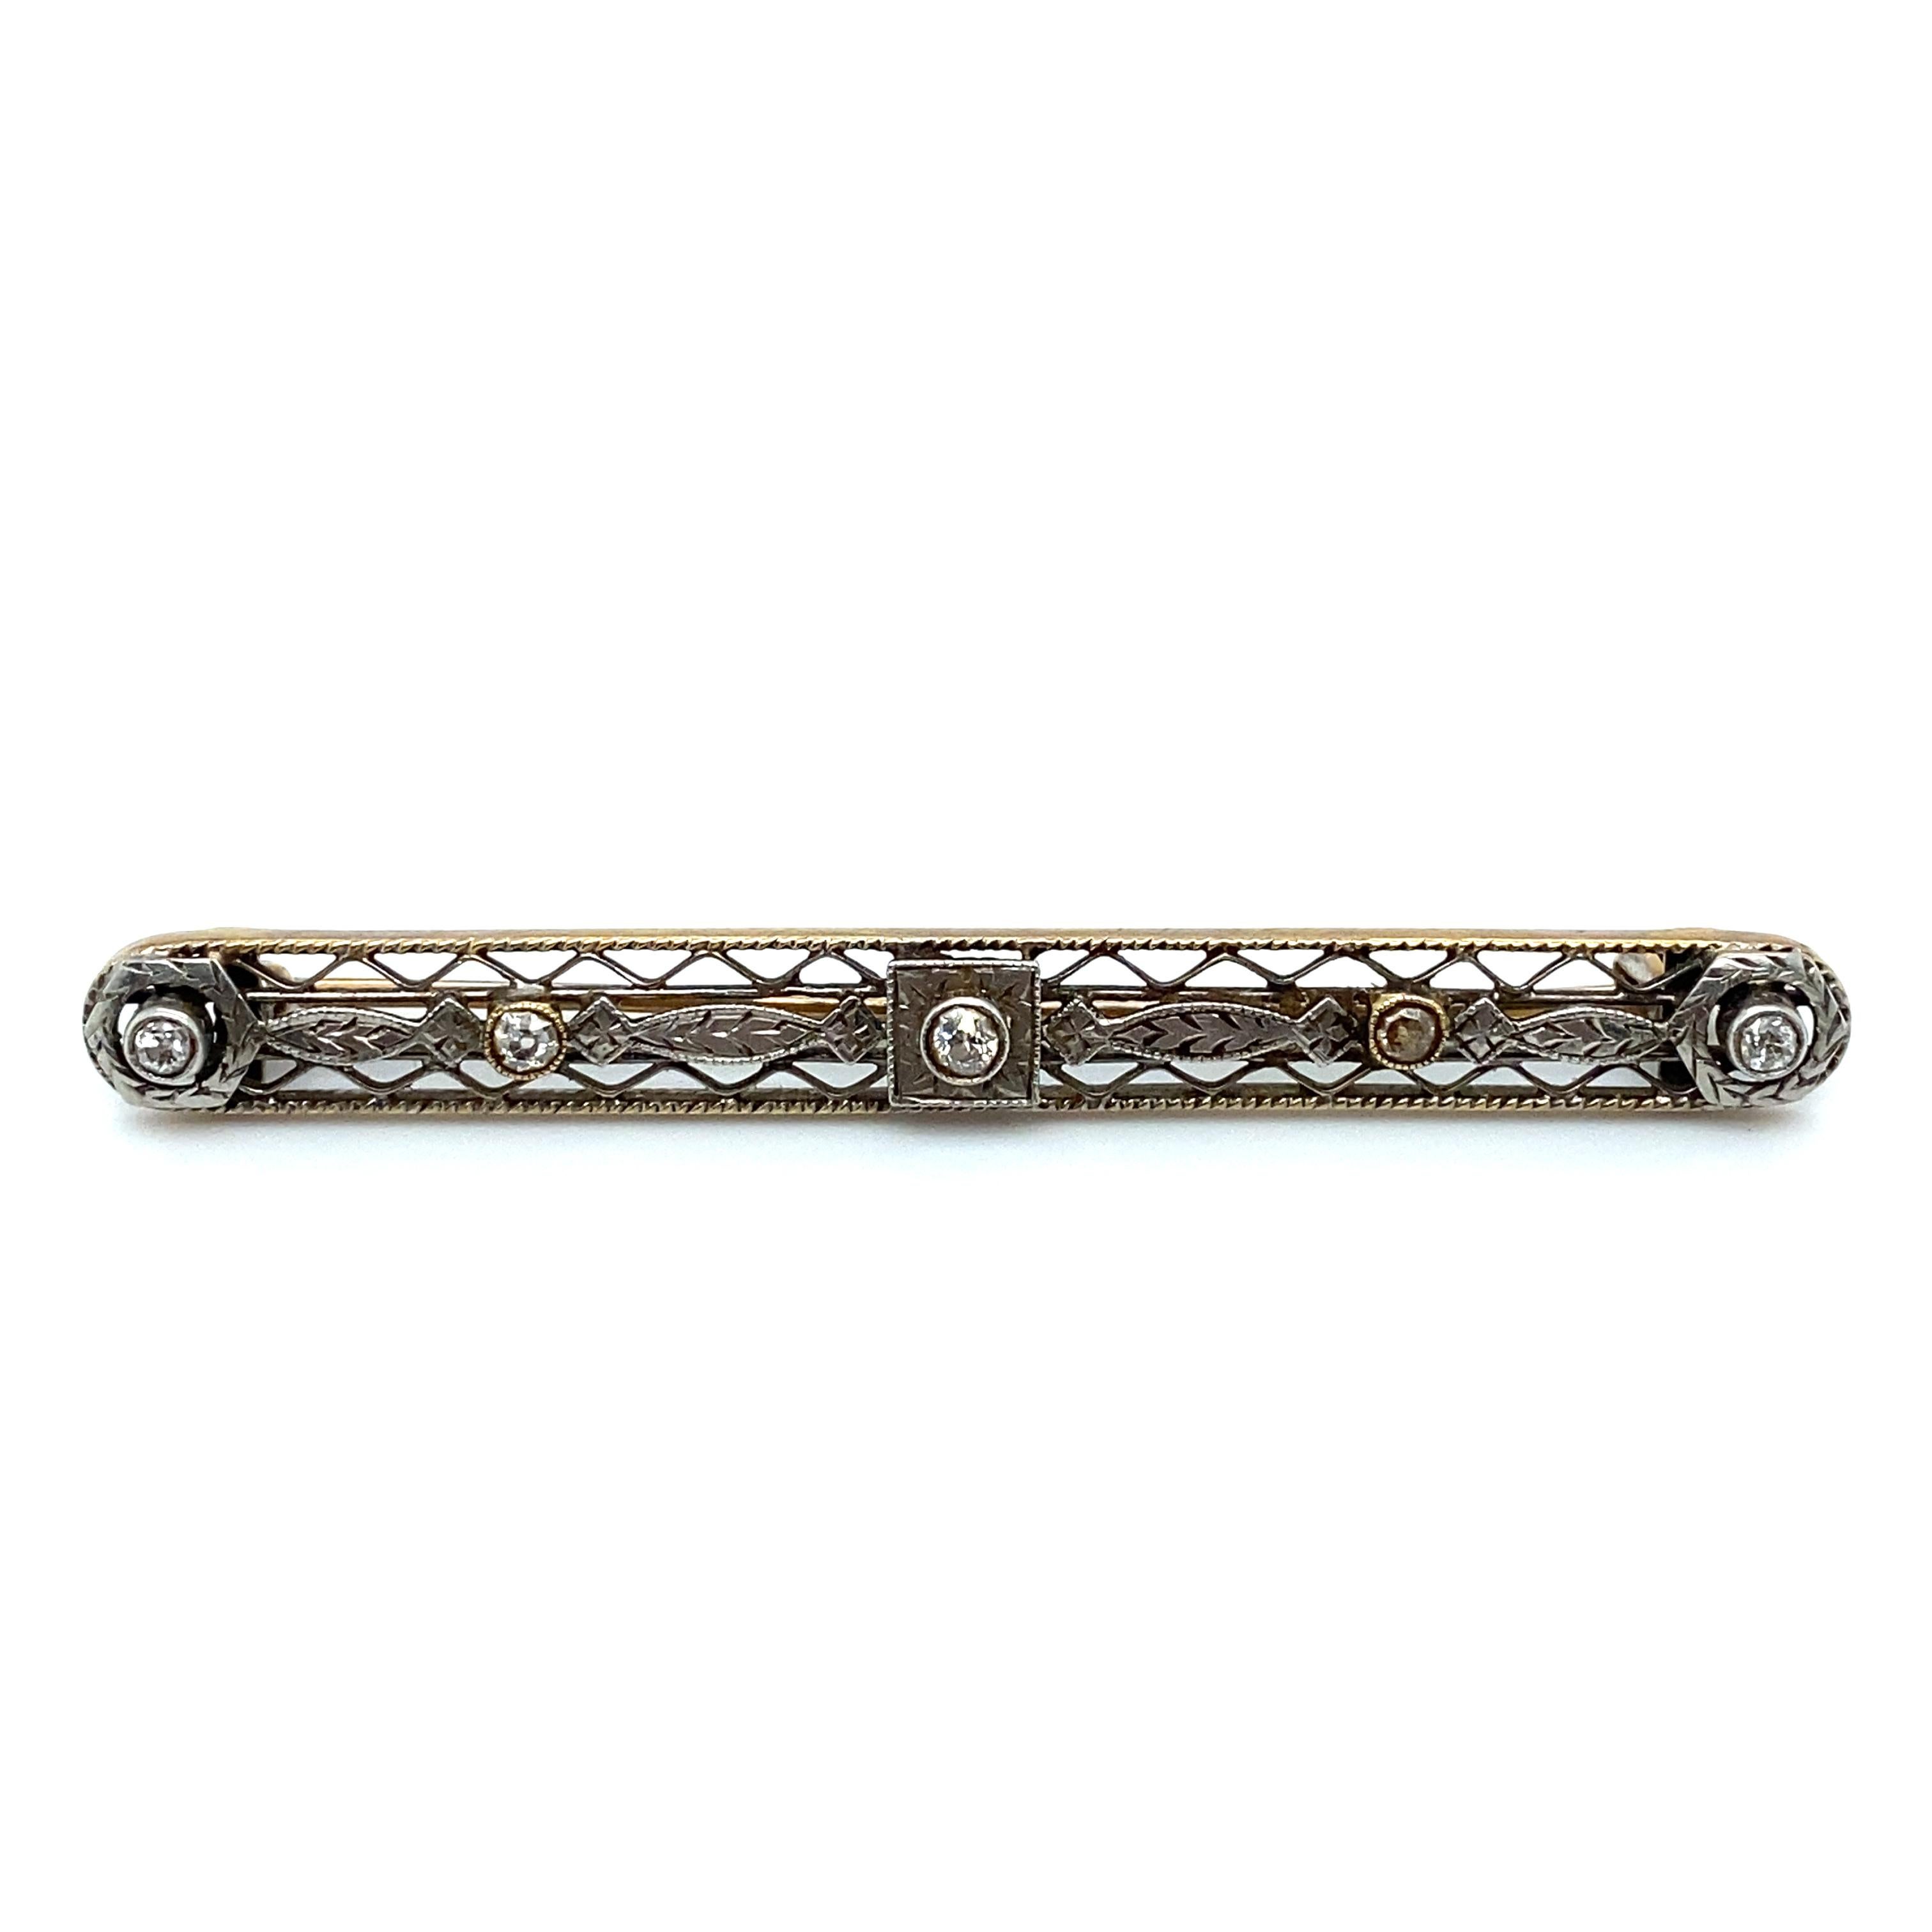 Item Details: This bar brooch from the 1920s has a classic Art Deco design with accent Old European cut diamonds. 

Circa: 1920s
Metal Type:  14 karat white gold
Weight: 4.6 grams
Size: 2.25 inch width 

Diamond Details:

Carat: Approximately 0.25